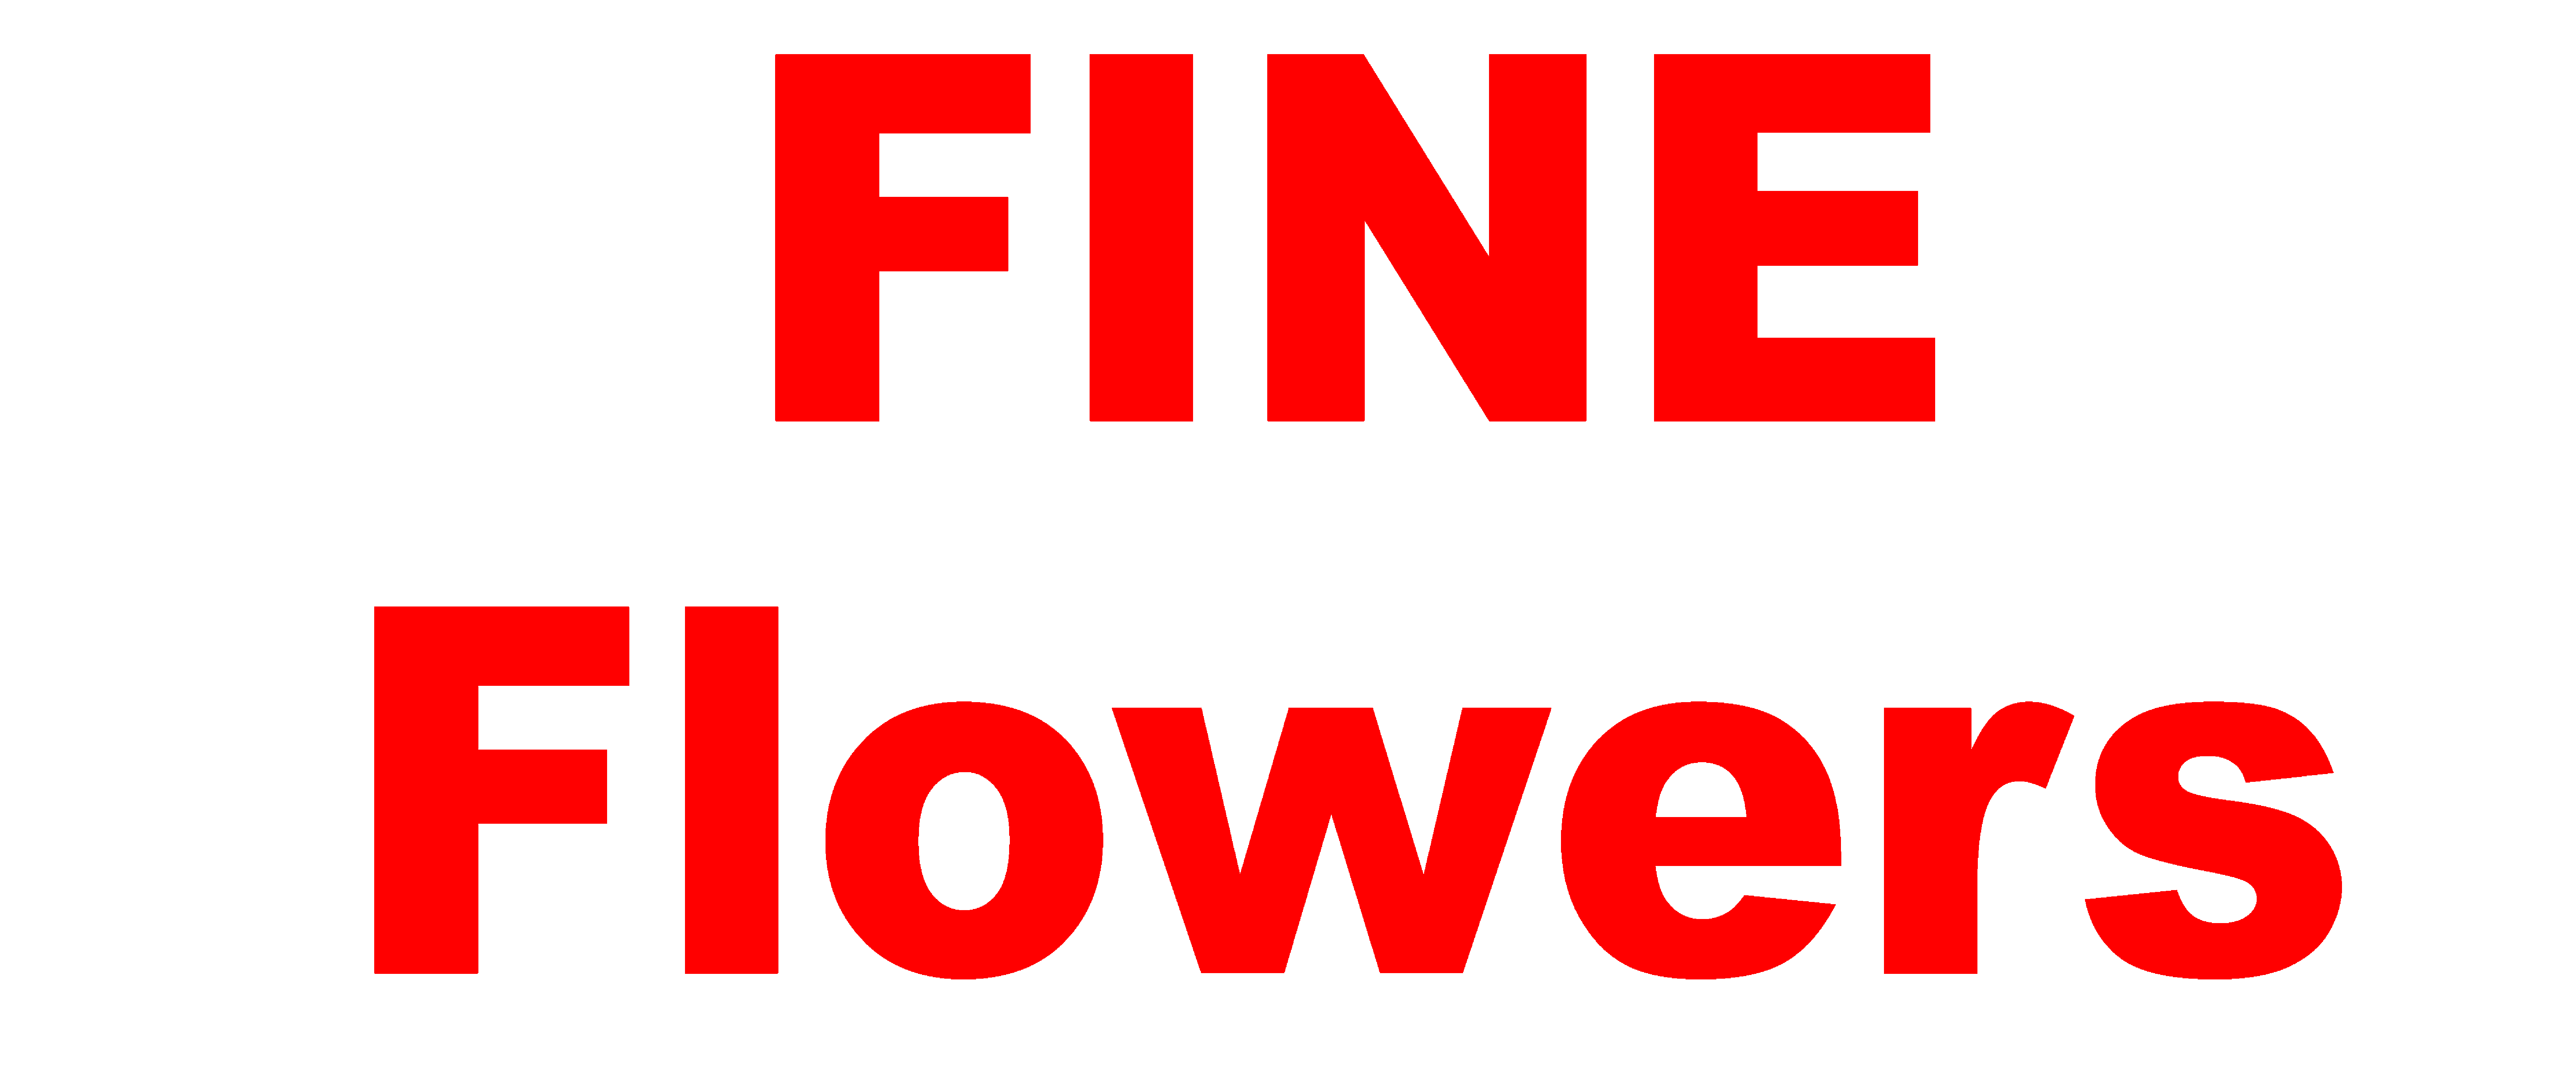 Flower with Red Oval Logo - Vancouver Florist - Flower Delivery by Fine Flowers